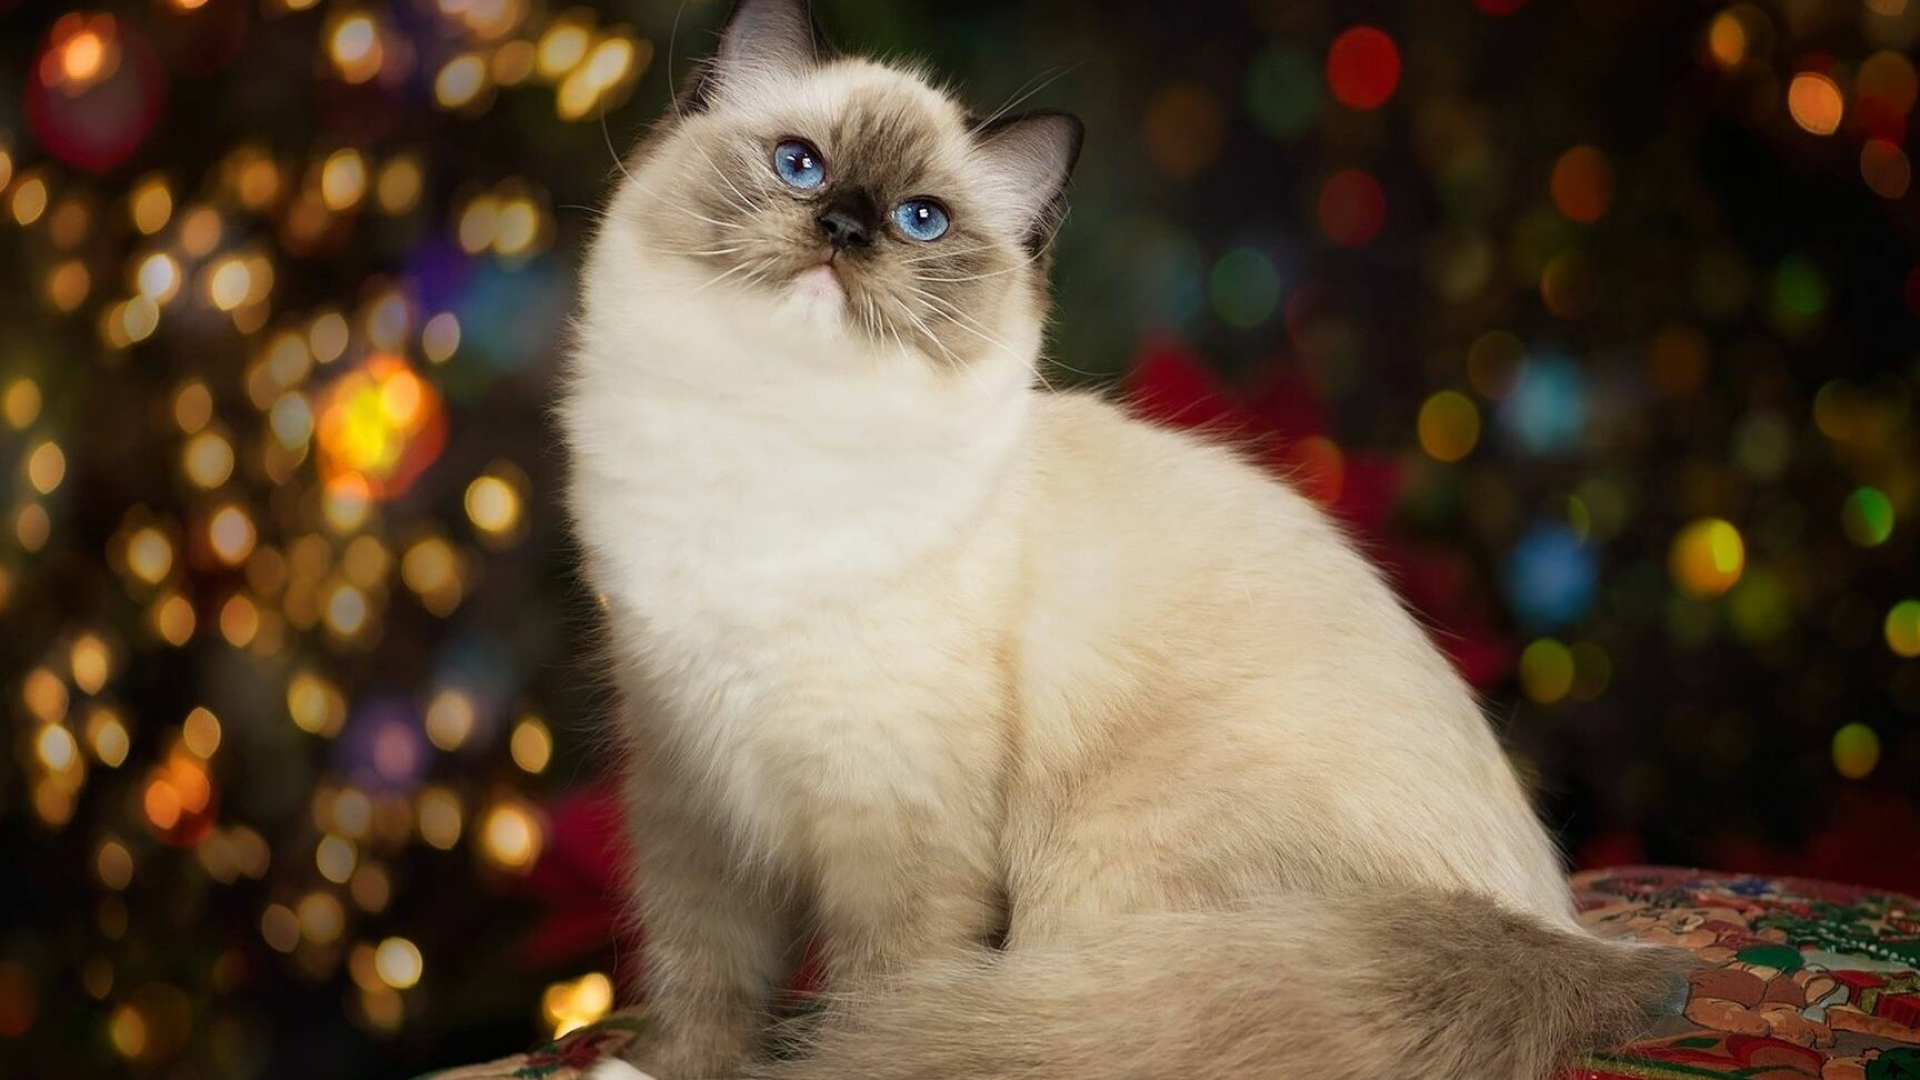 Ragdoll: This breed is one of the largest domesticated cat breeds. 1920x1080 Full HD Wallpaper.